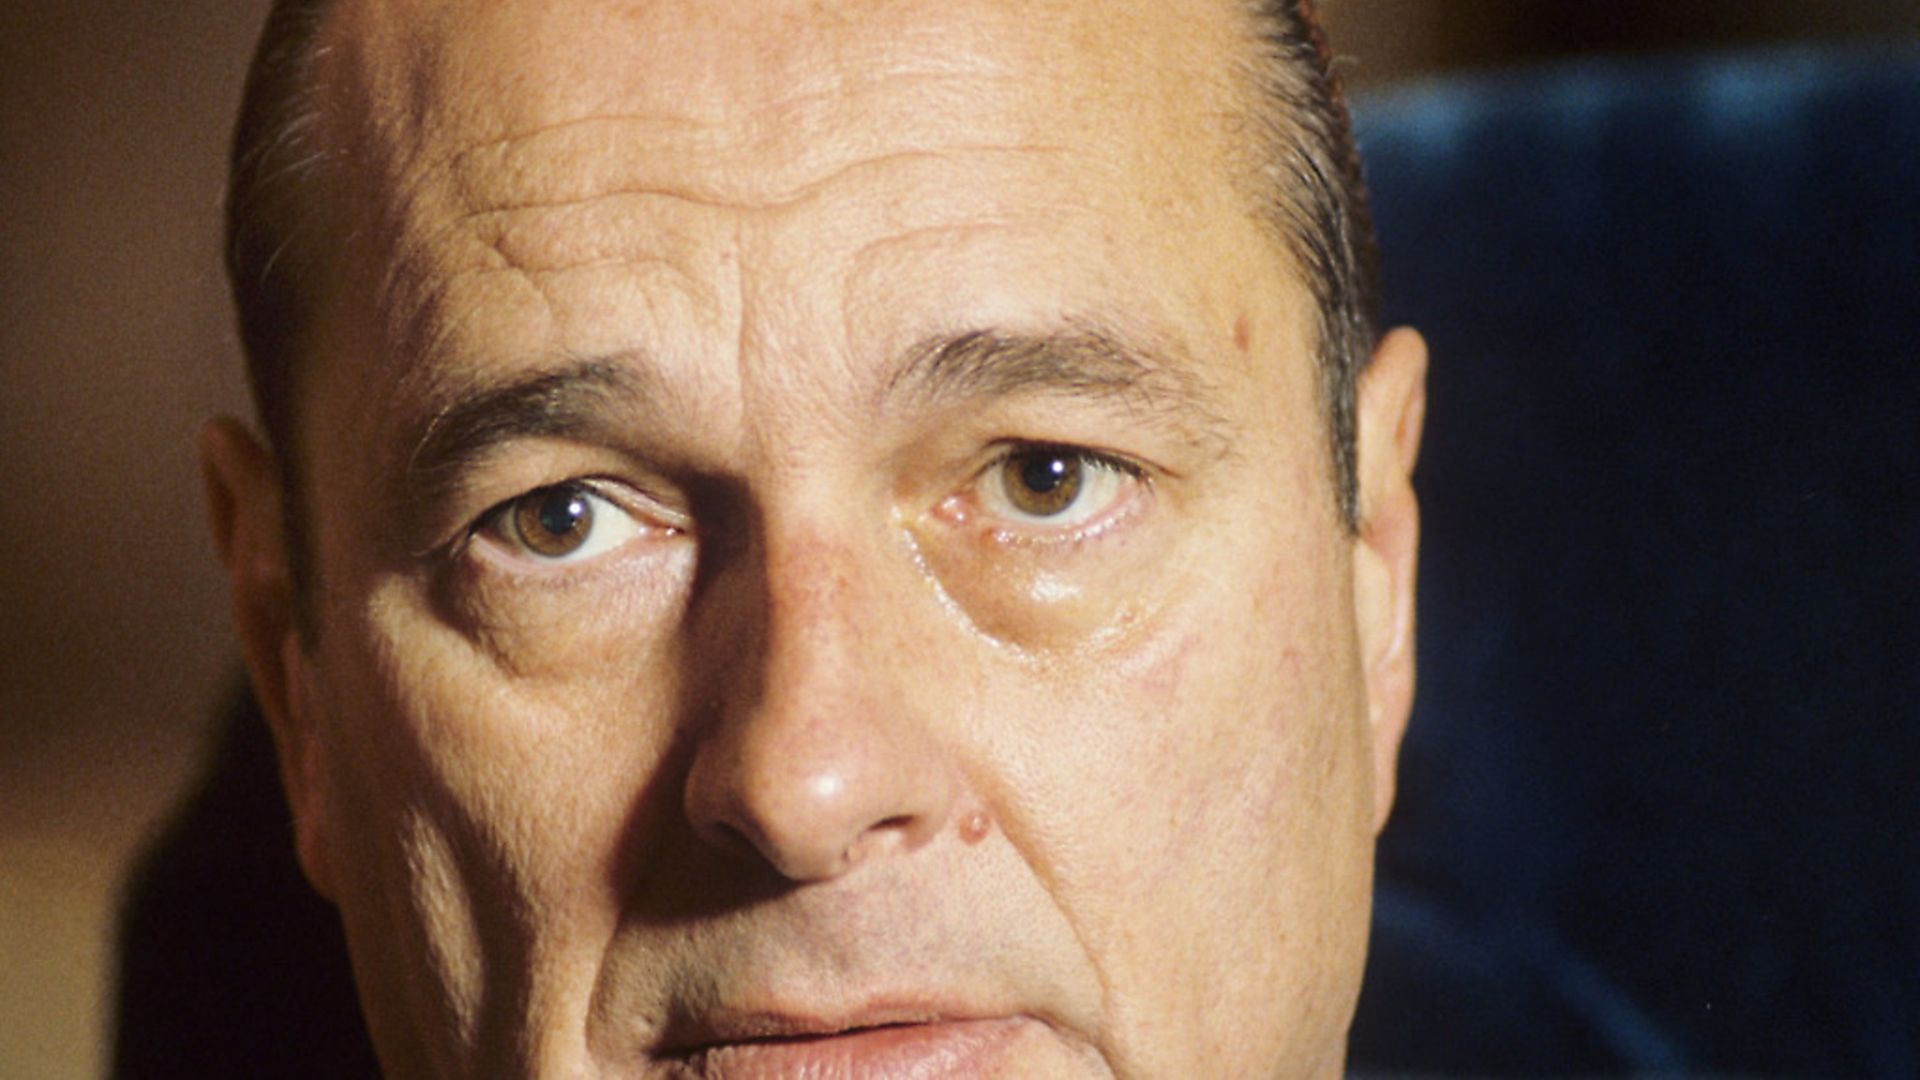 Former French president Jacques Chirac (question nine) Pic: Roger-Viollet/Topfoto - Credit: Roger-Viollet / Topfoto